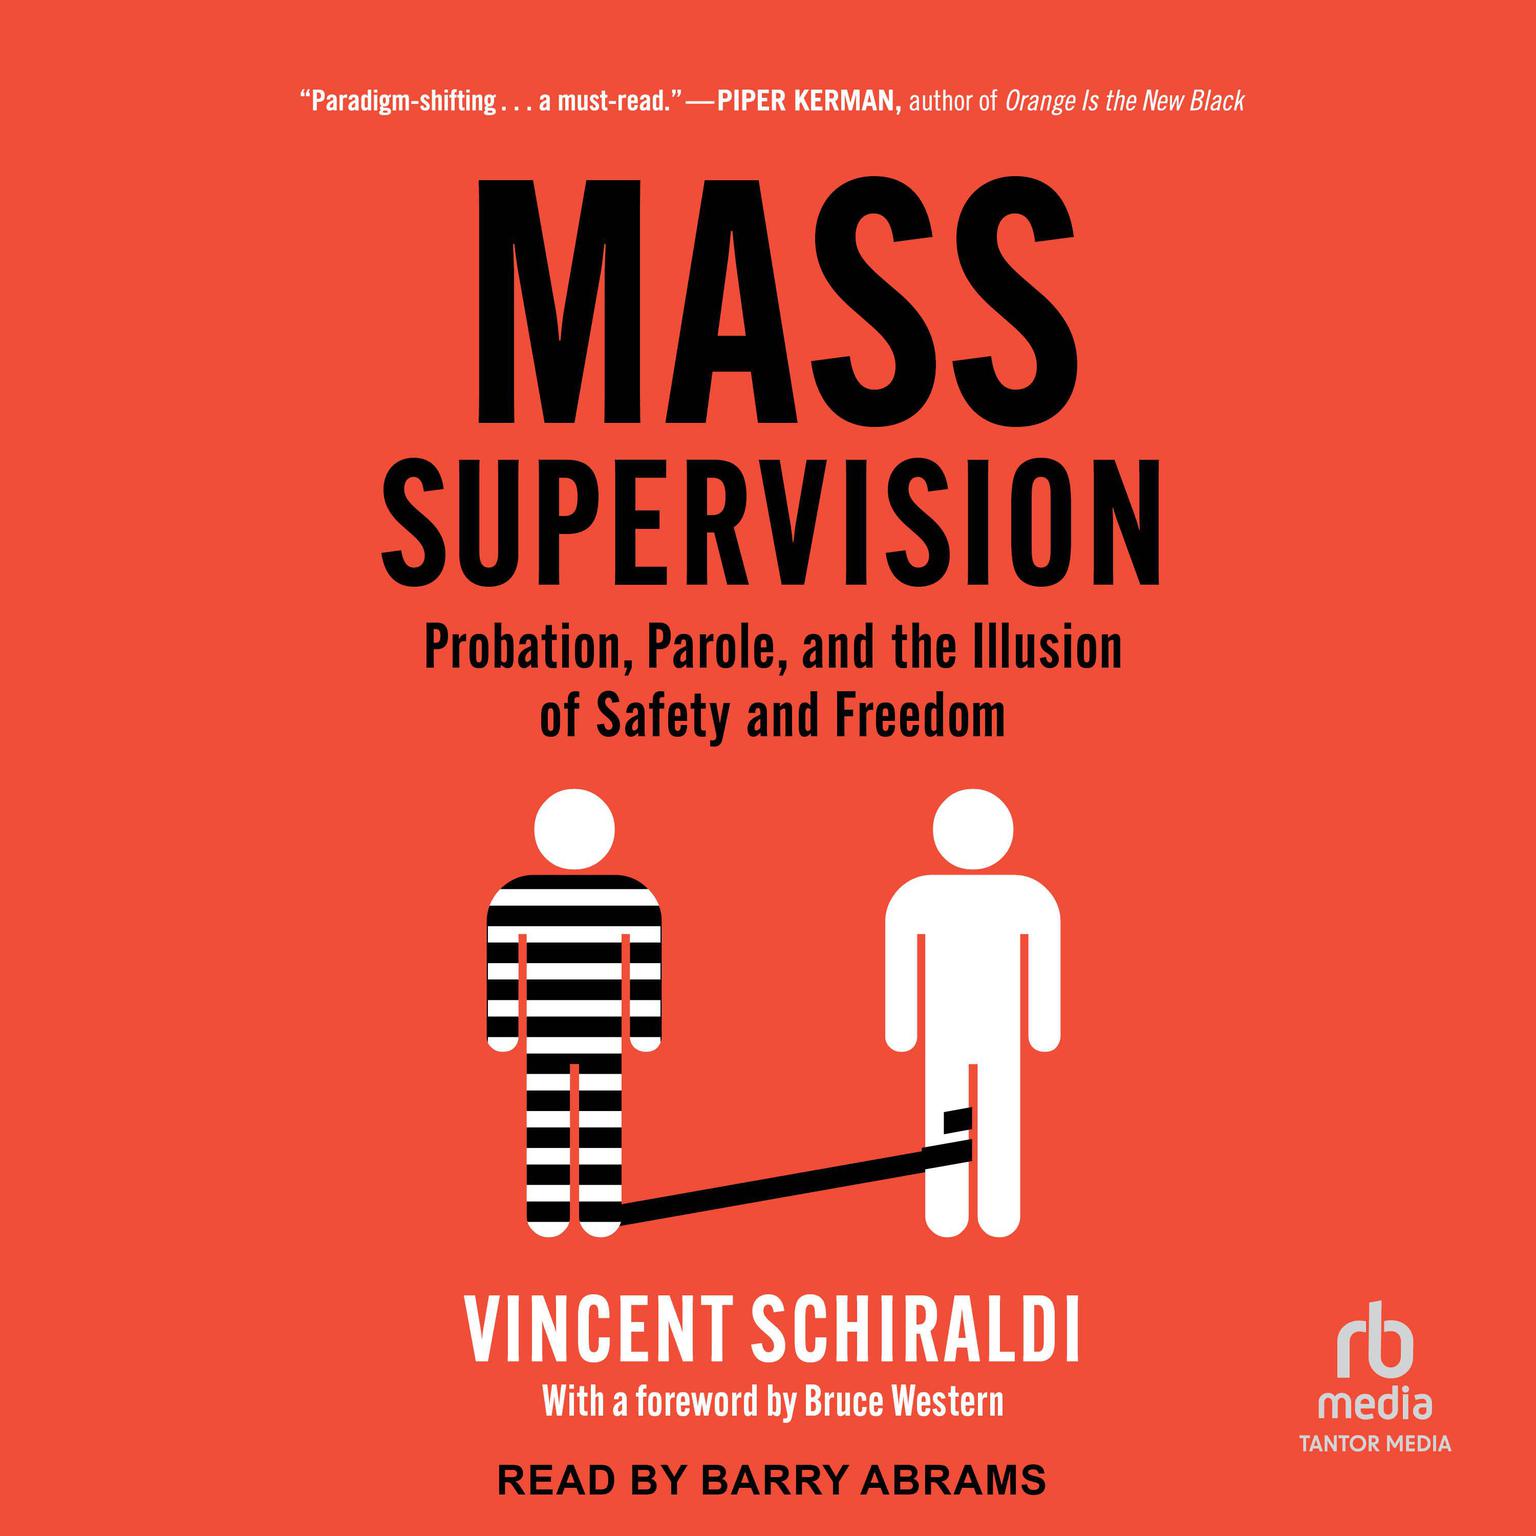 Mass Supervision: Probation, Parole, and the Illusion of Safety and Freedom Audiobook, by Vincent Schiraldi